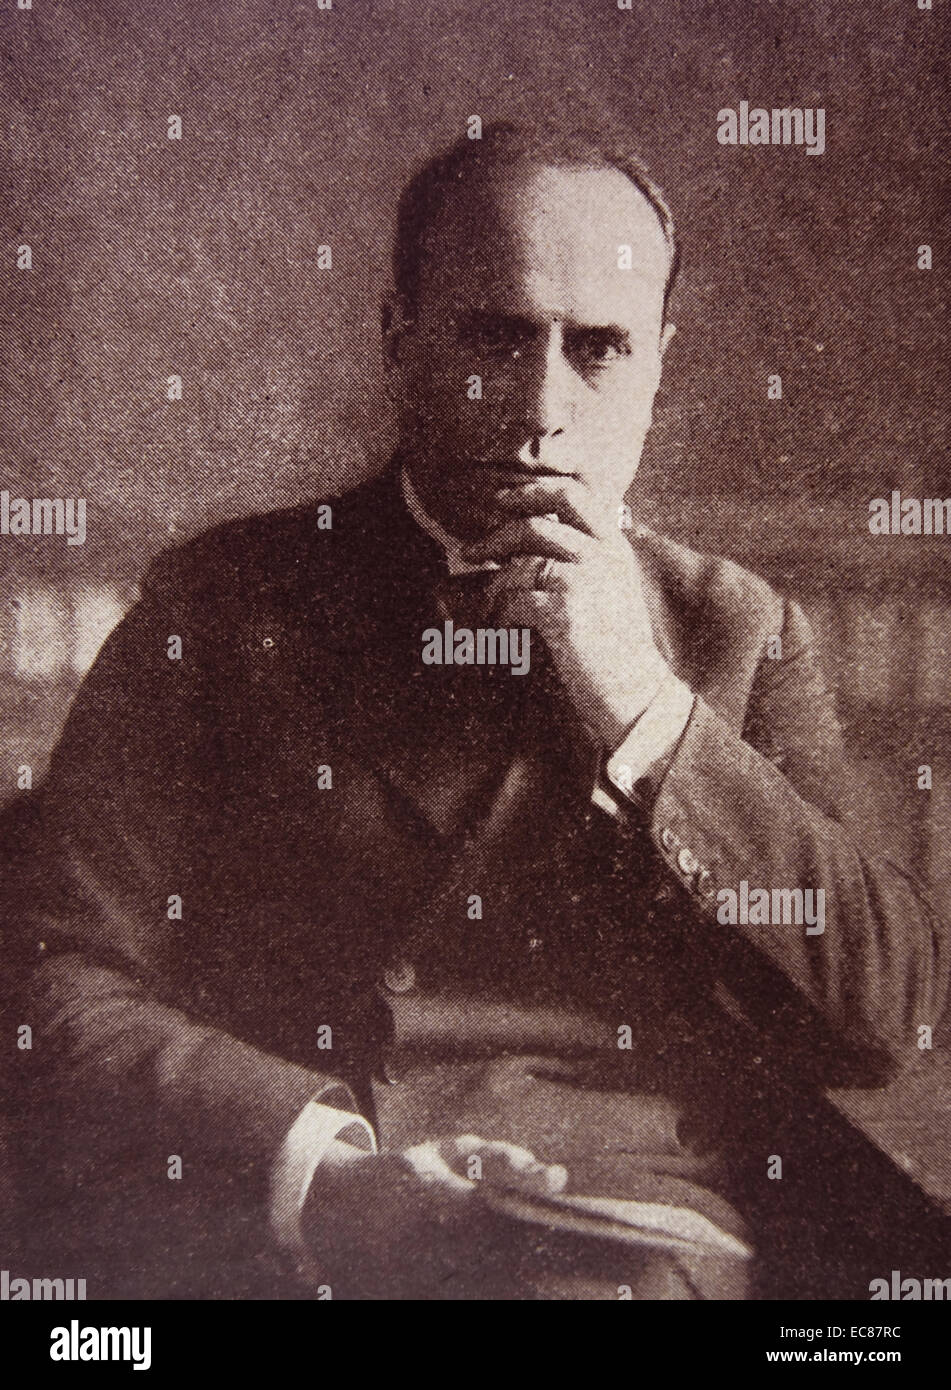 Photograph of Benito Ailcare Andrea Mussolini (1883-1945) Italian politician, journalist, and leader of the National Fascist Party, ruling the country as Prime Minister from 1922 until his ousting in 1943. Dated 1922 Stock Photo